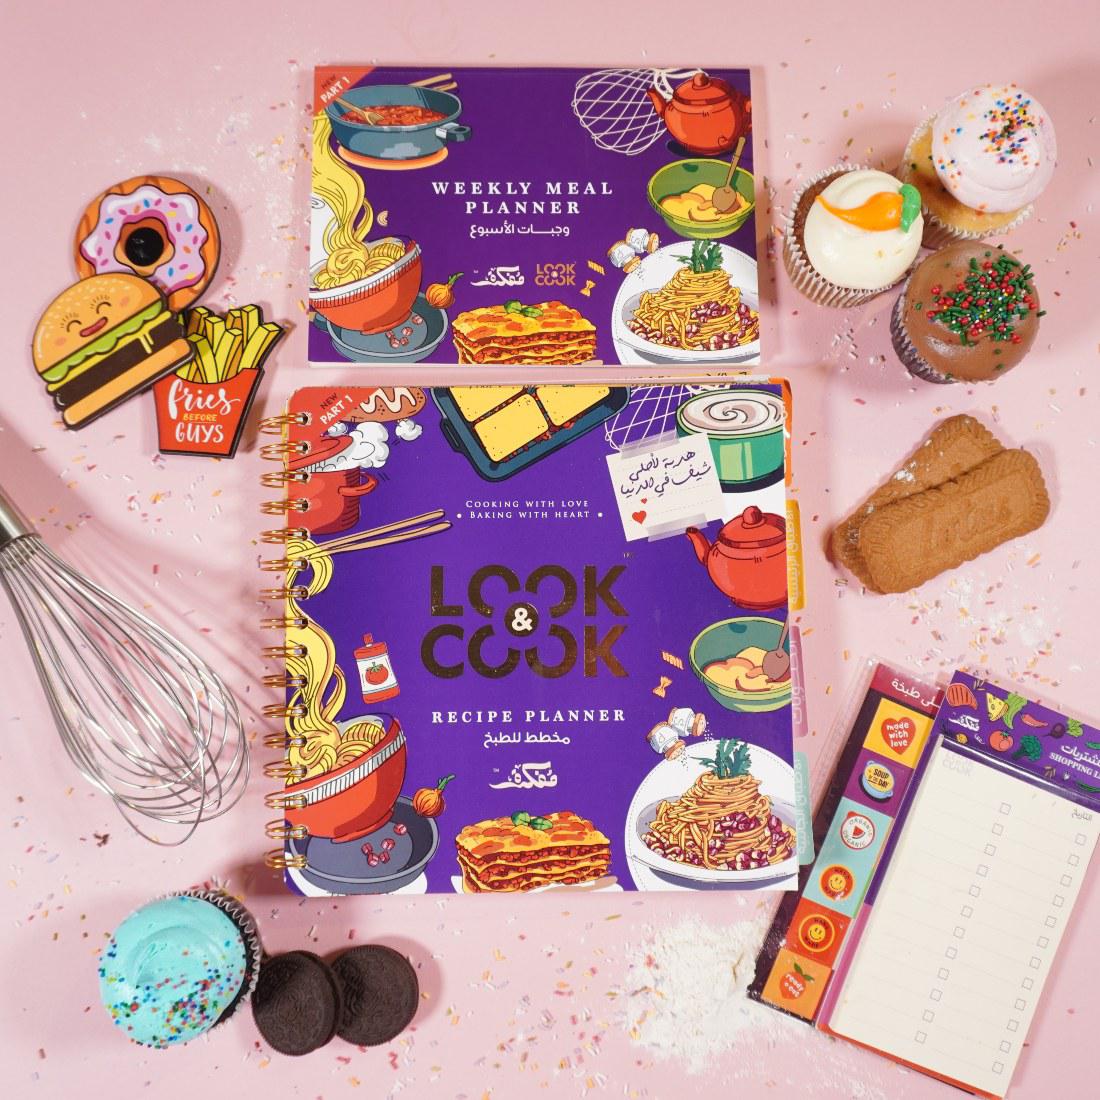 Look and Cook (Recipe Gift Box)